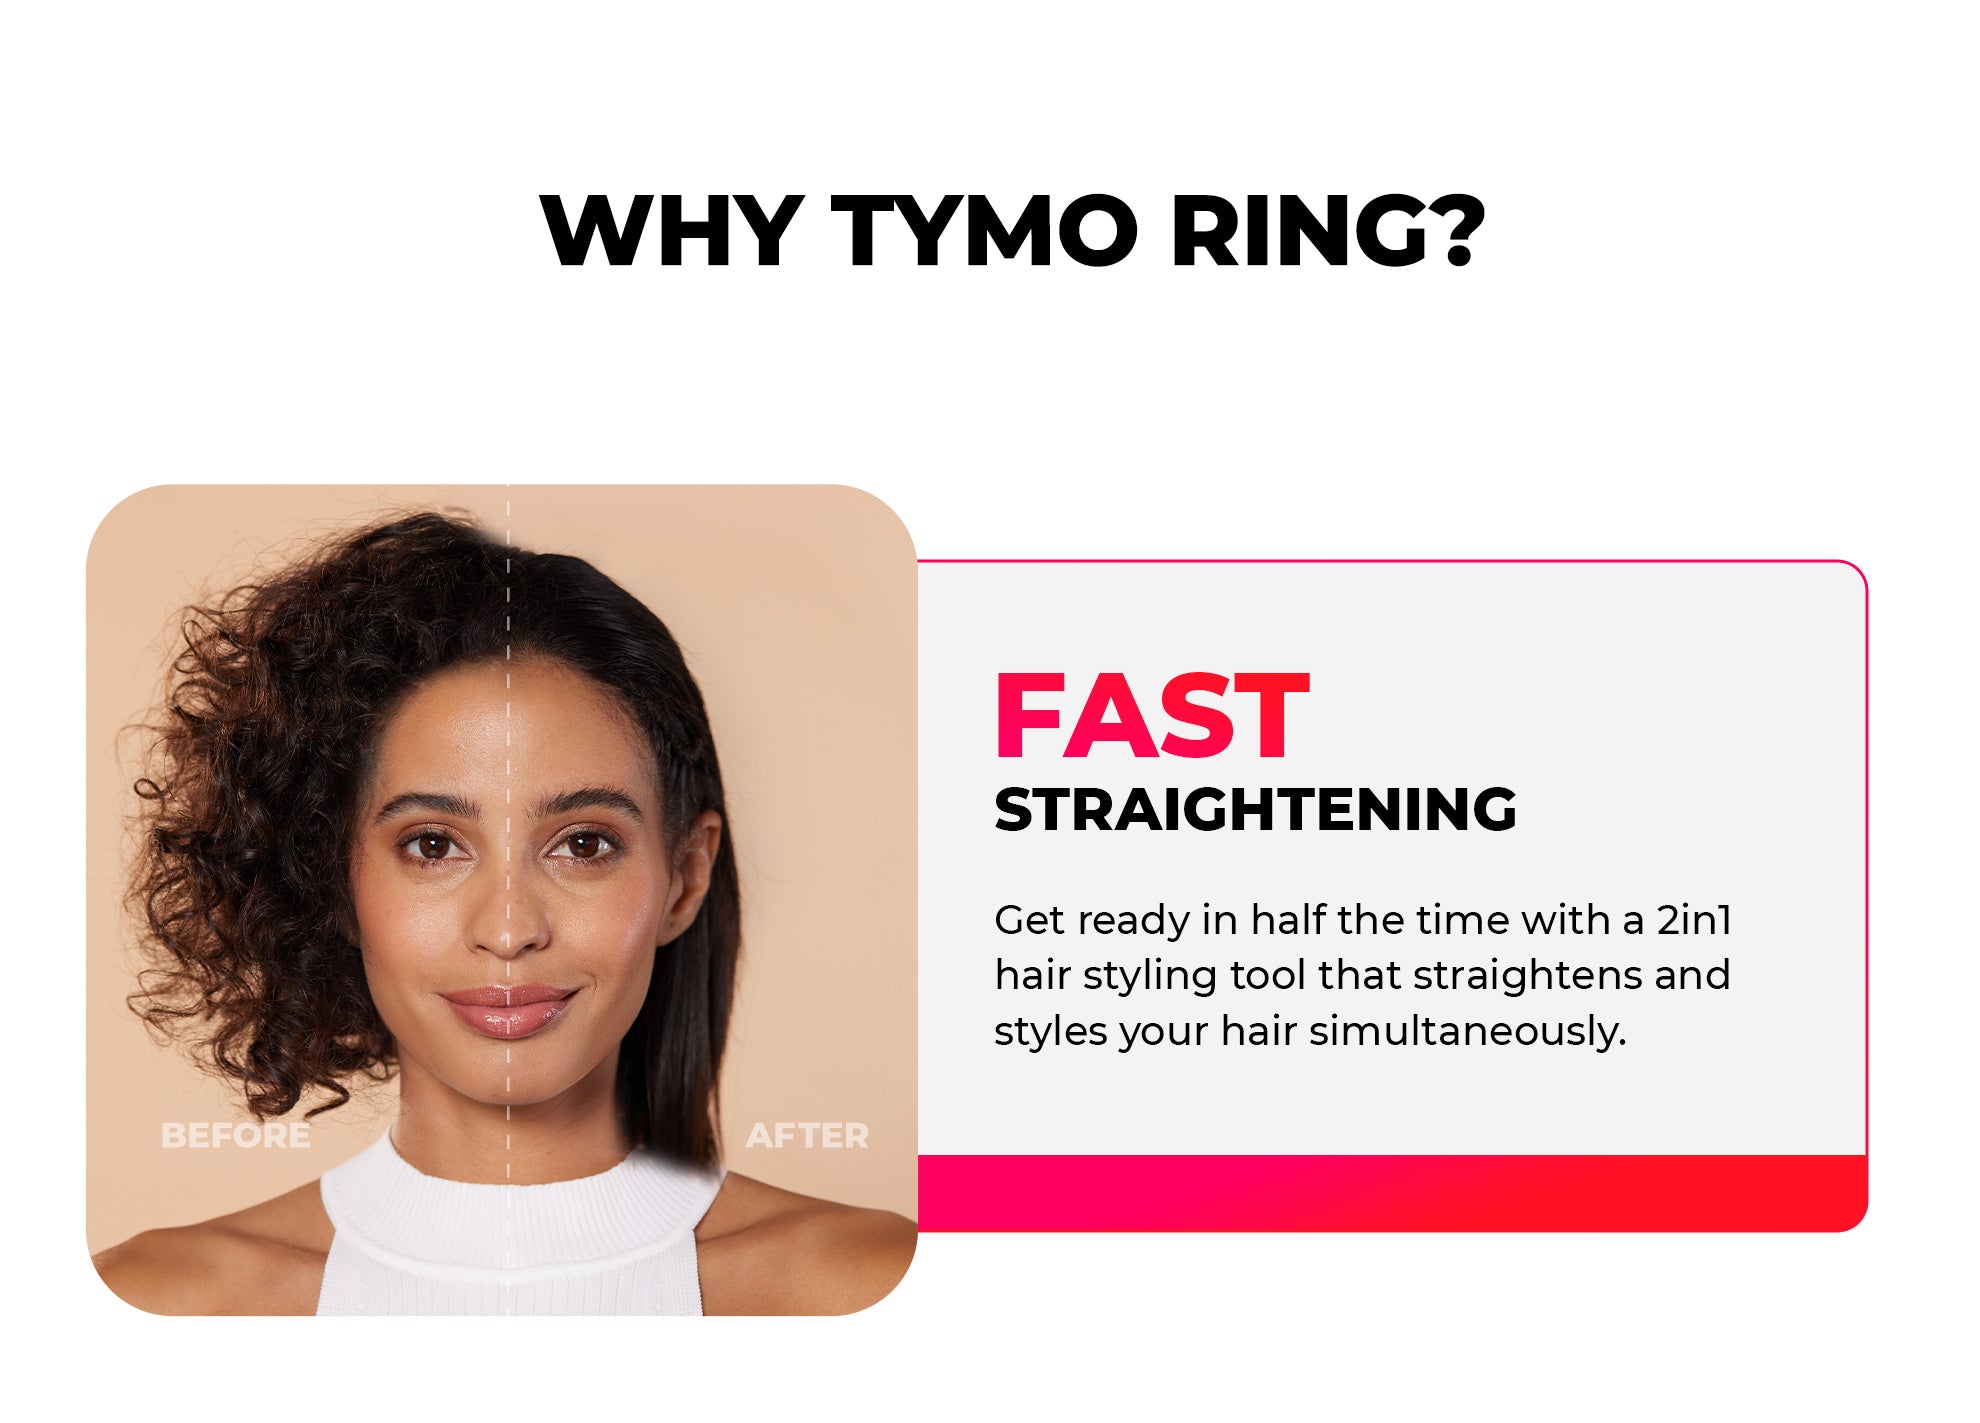 Trying one swipe with the Tymo Ring Plus @TYMO BEAUTY US, so easy, no